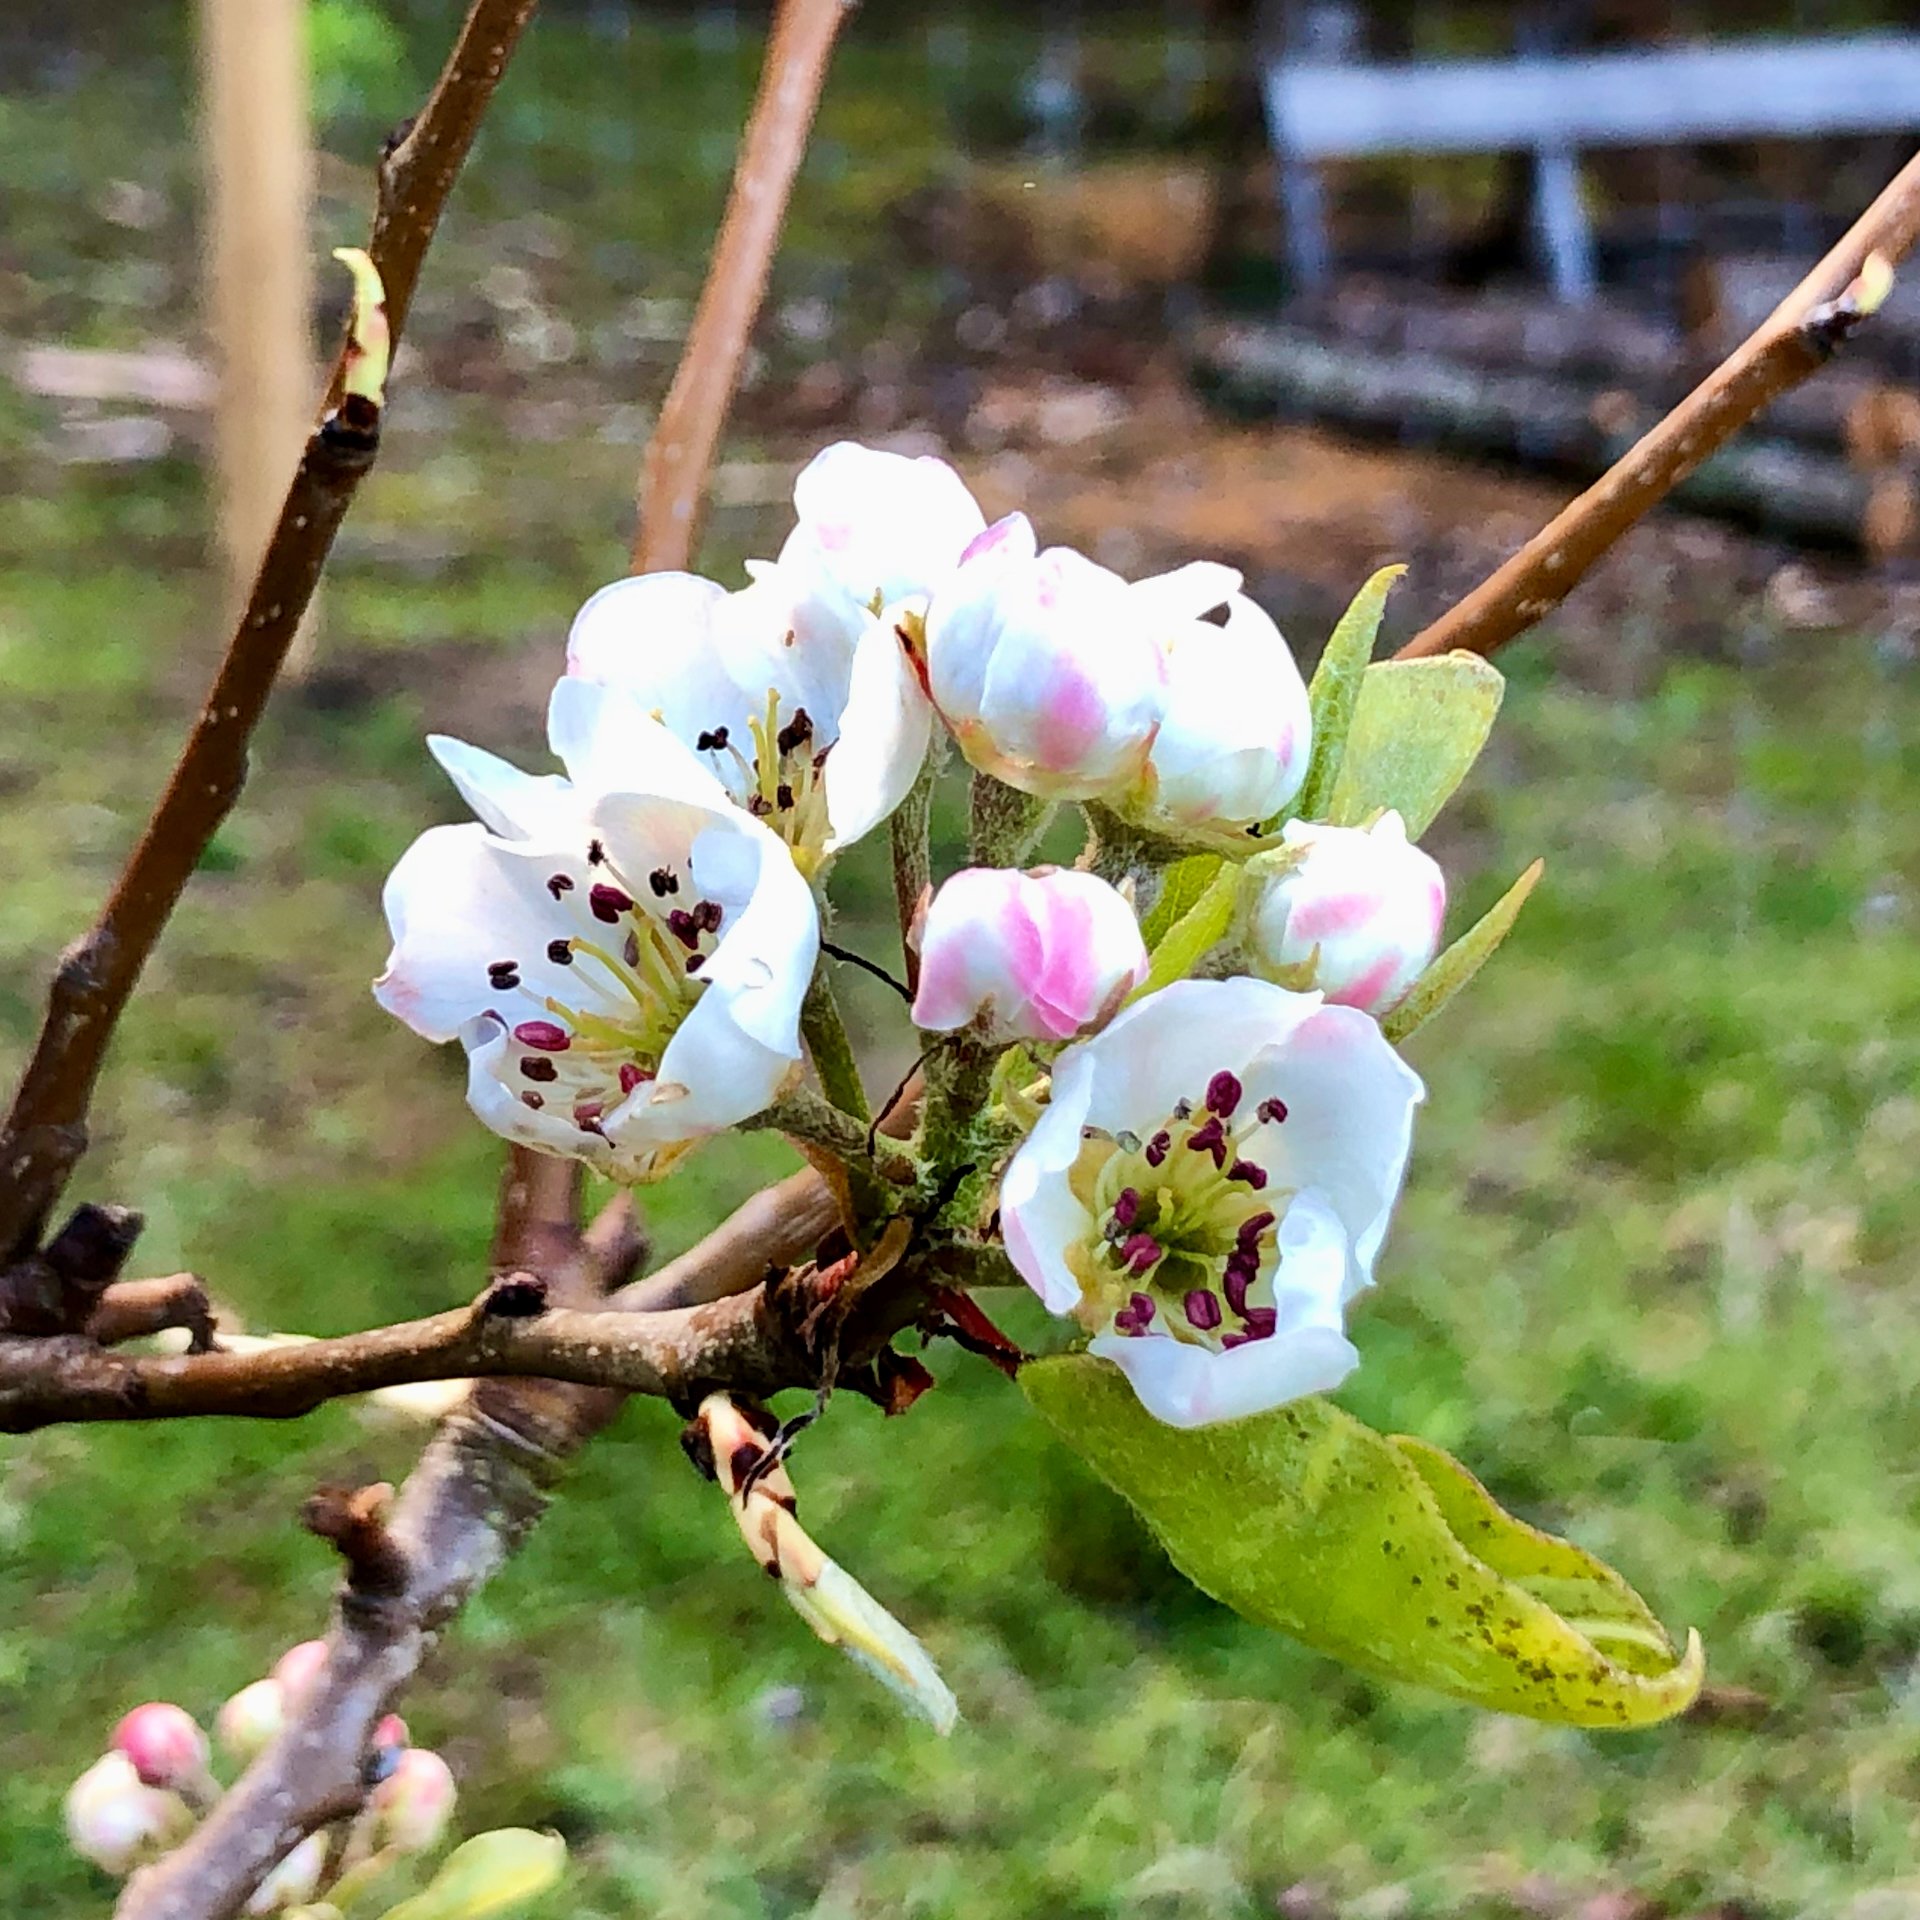  One of the pear trees has lots of blossoms just starting to open. 